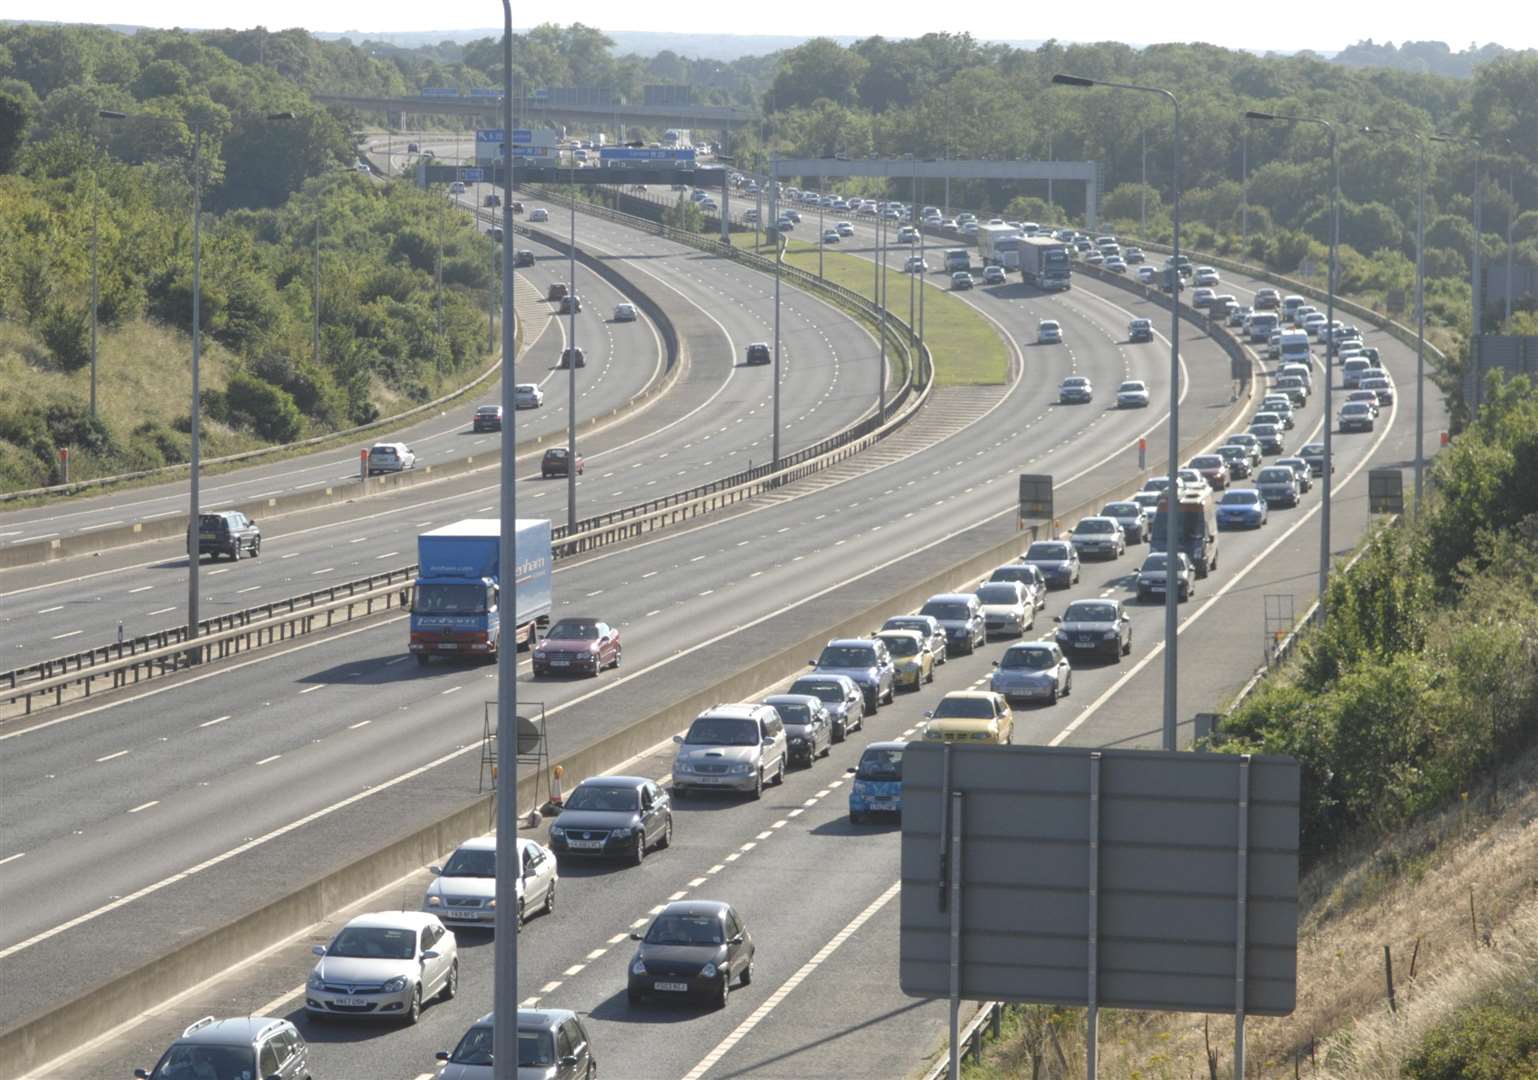 There are roadworks on the M20 in several places